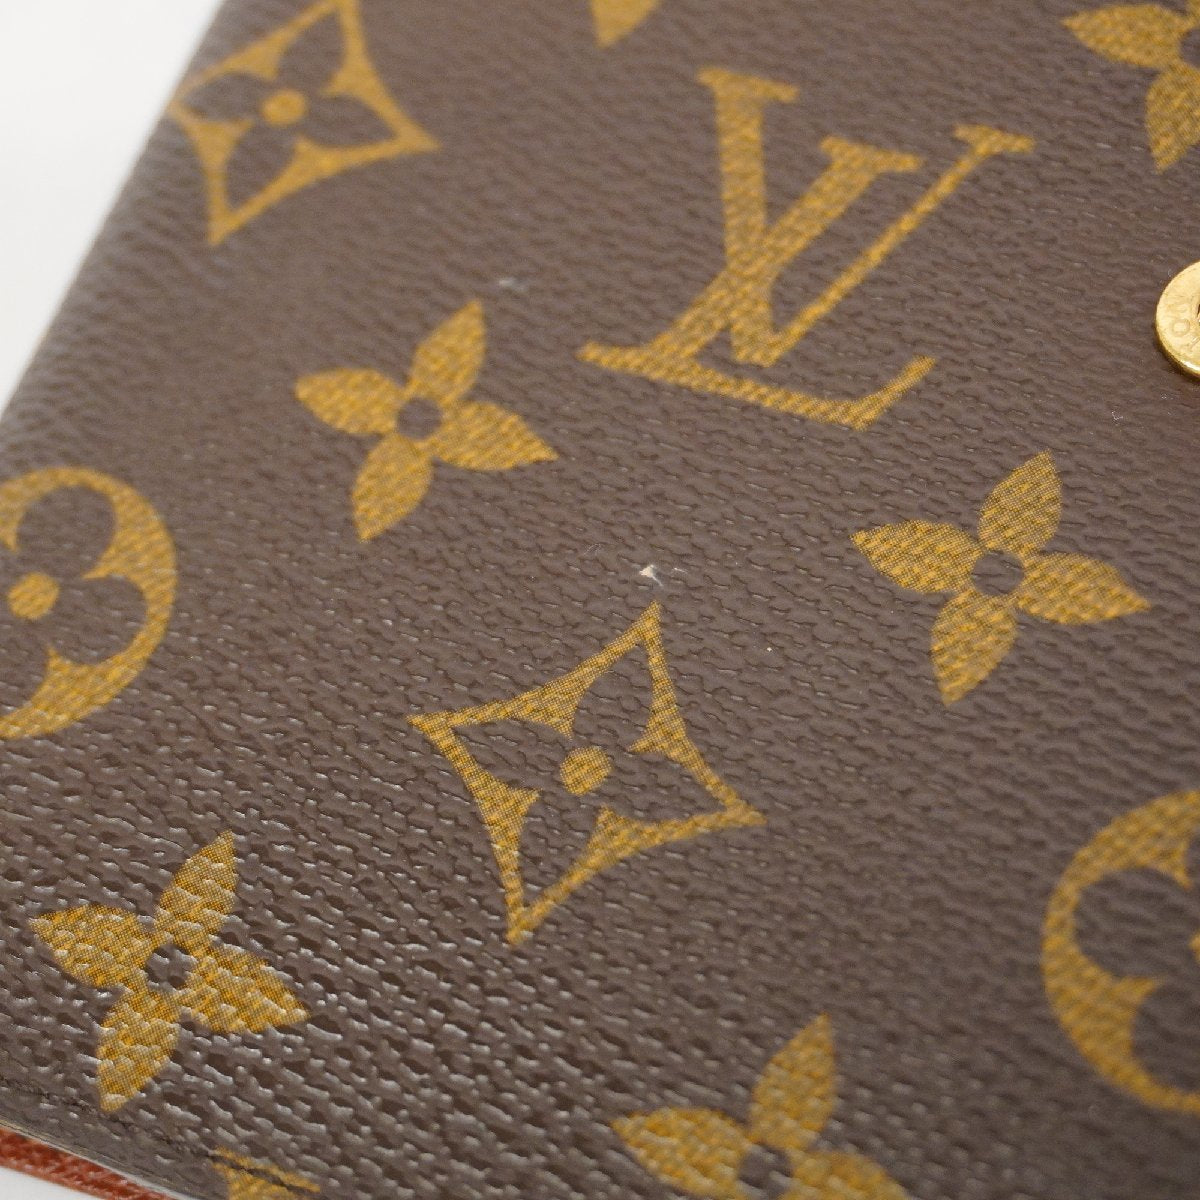 Pre-Owned Louis Vuitton Notebook Cover Agenda PM Brown Monogram